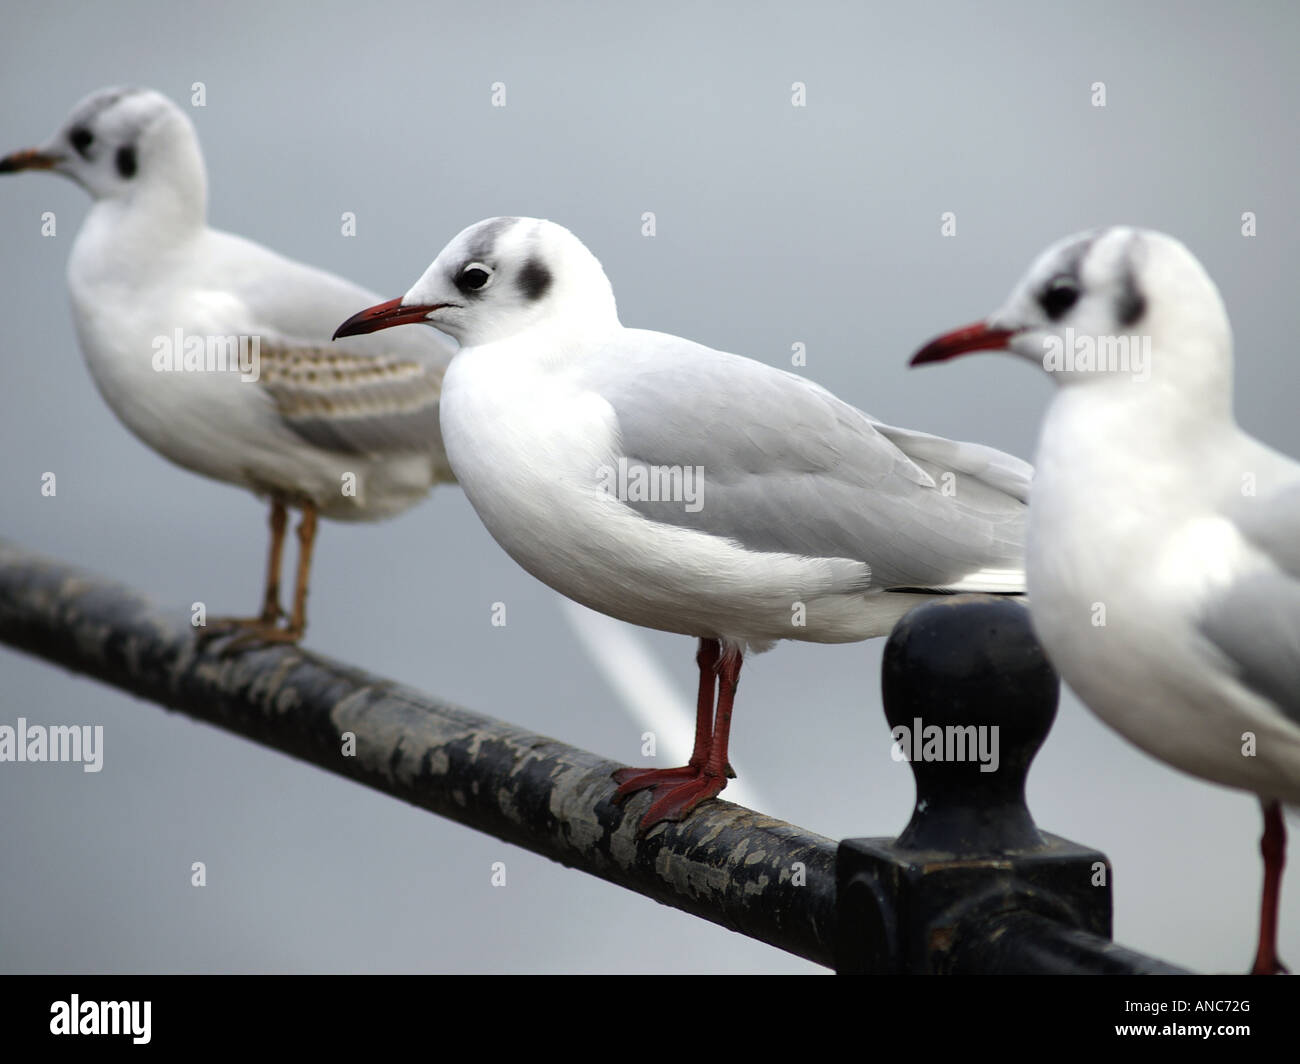 Black Headed Gull, Larus ridibundus,  in winter plumage perched on a metal post in a row Stock Photo